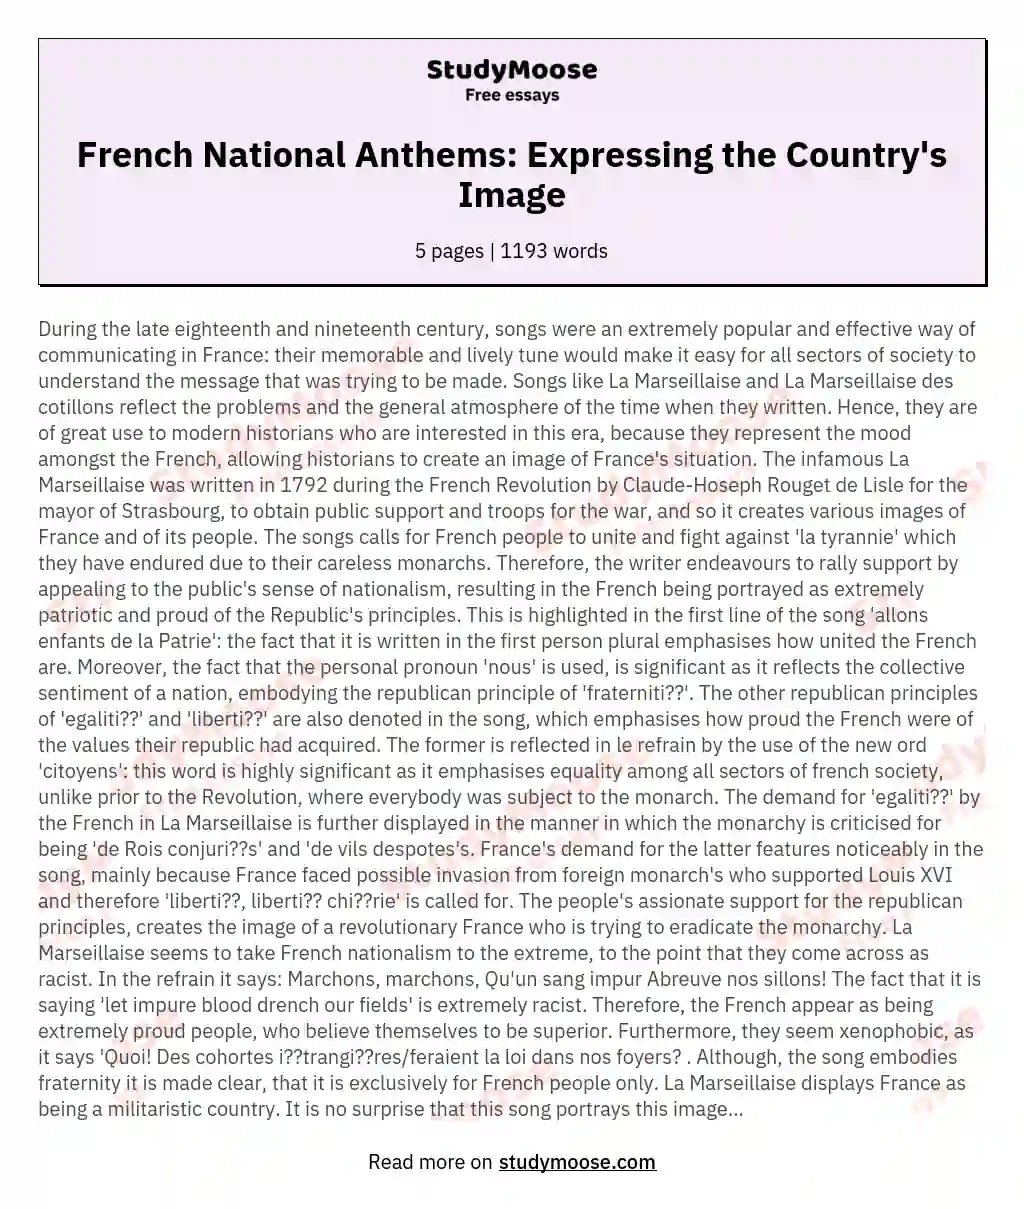 French National Anthems: Expressing the Country's Image essay